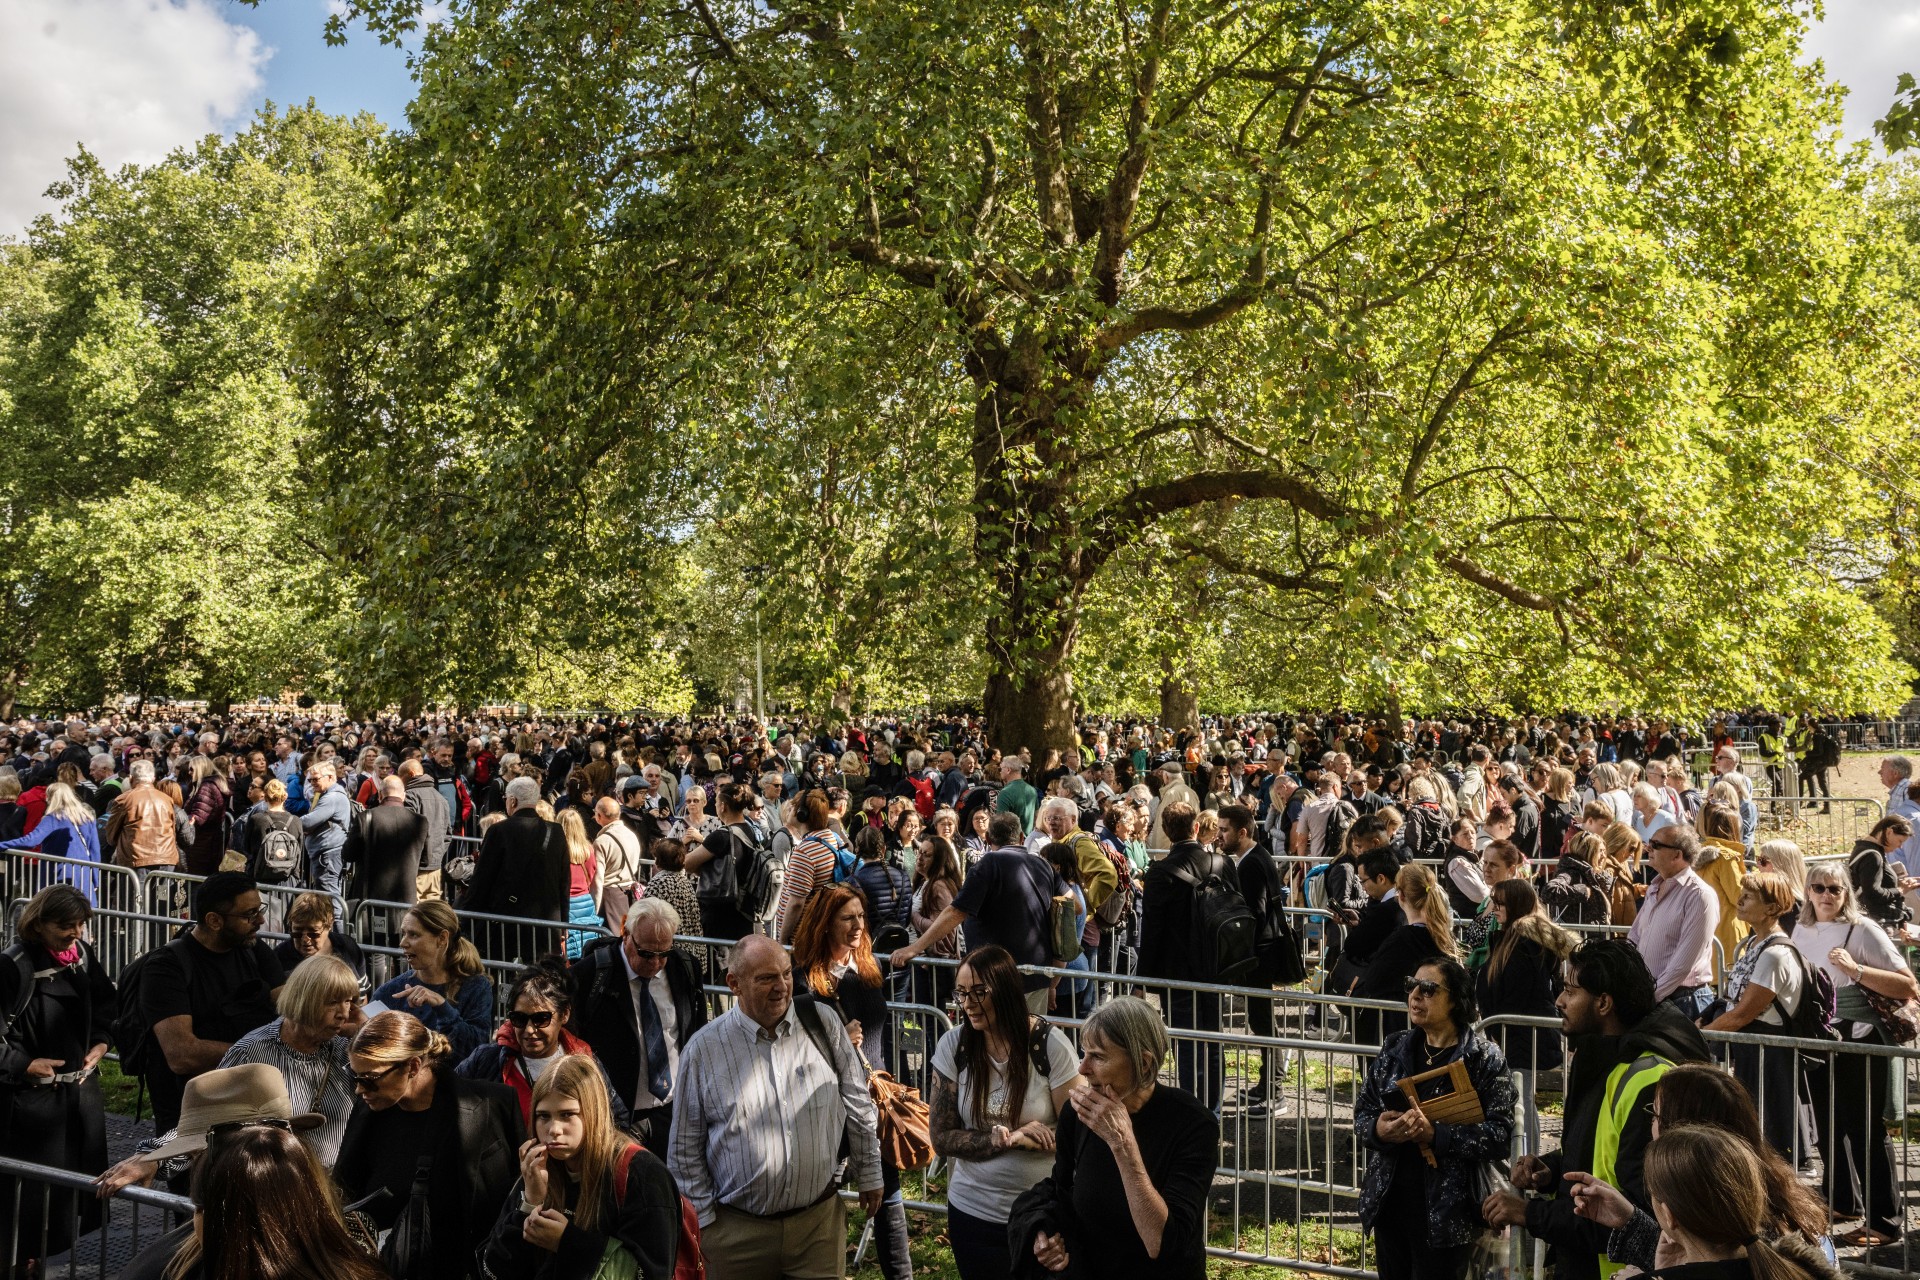 A massive queue of mourners waits to pay respects to Queen Elizabeth II.